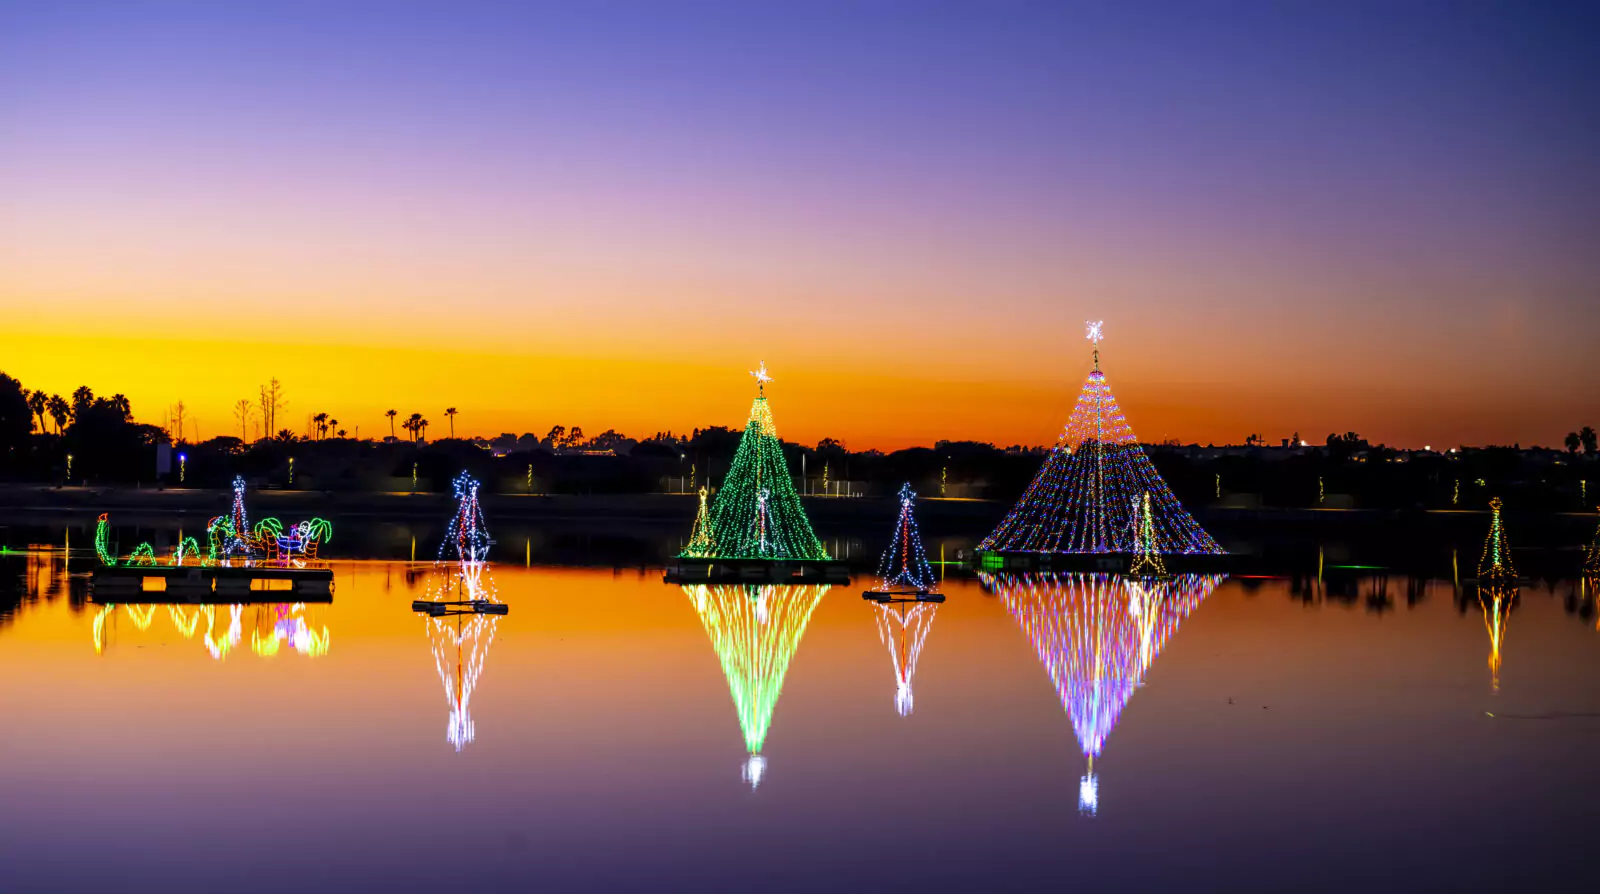 Sunset at Newport Dunes Beach Resort with Orange and Purple Sky and Floating Holiday Light Displays on the Water 